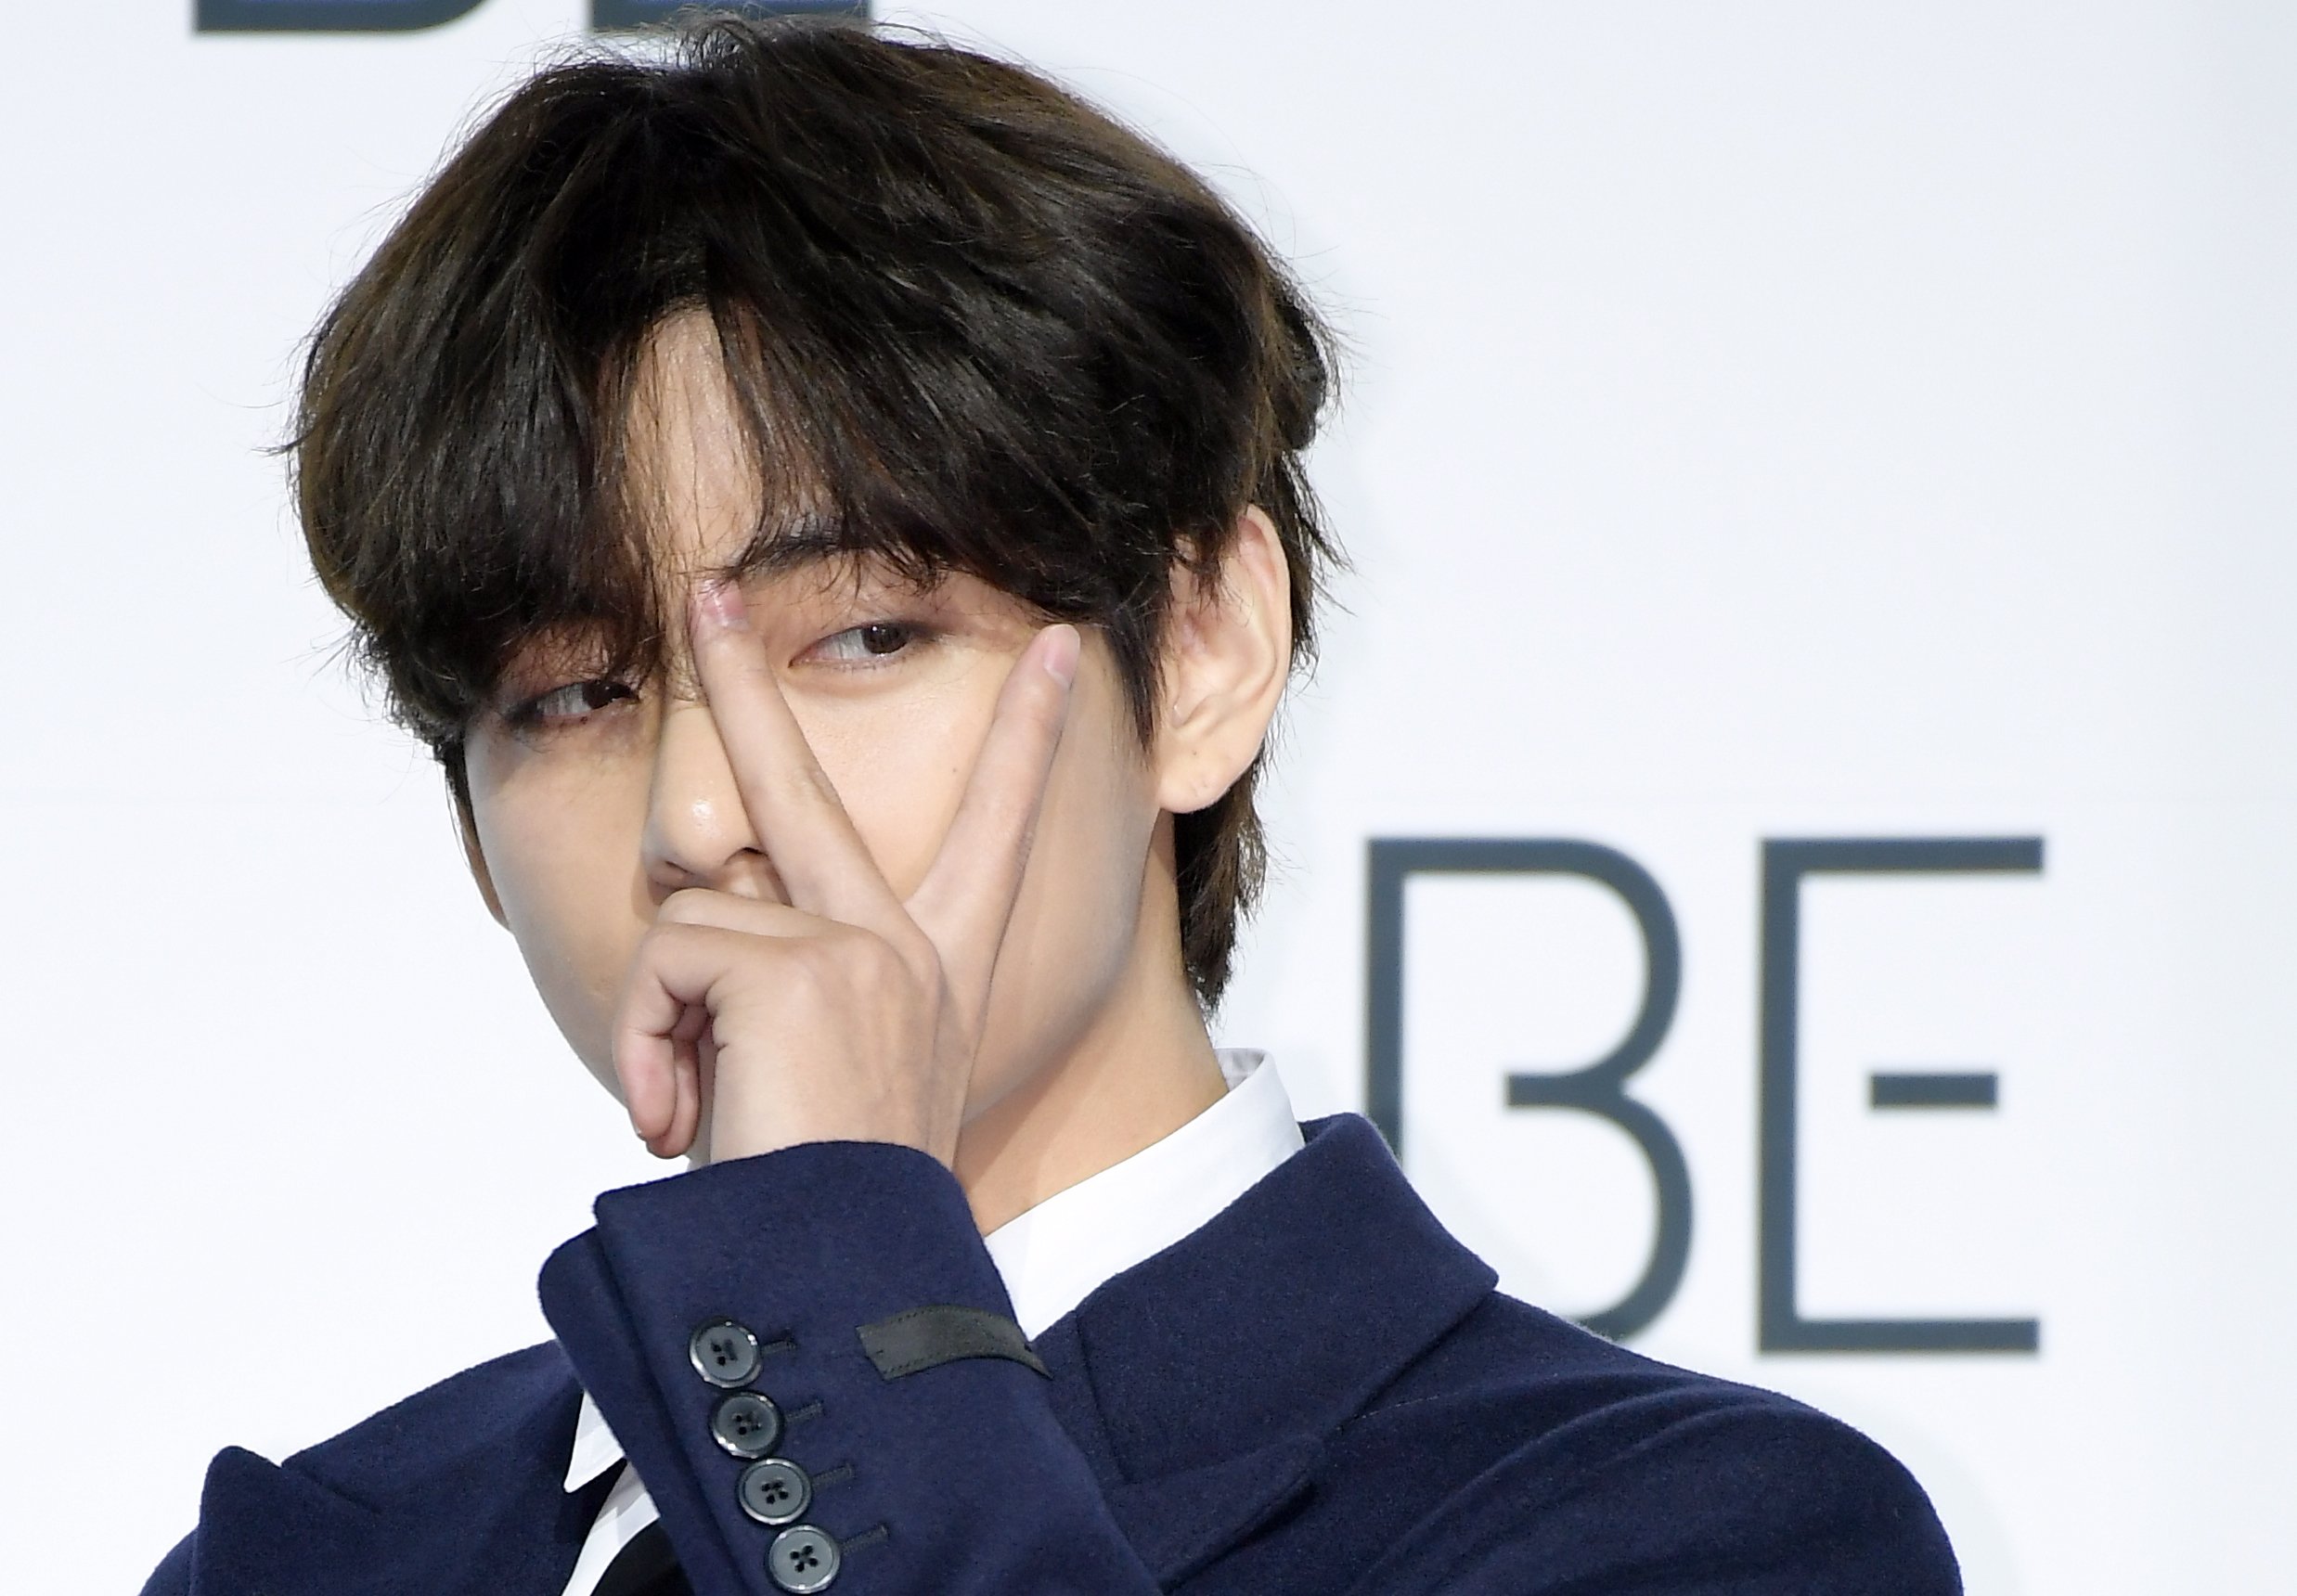 V of BTS during BTS's New Album 'BE (Deluxe Edition)' Release Press Conference